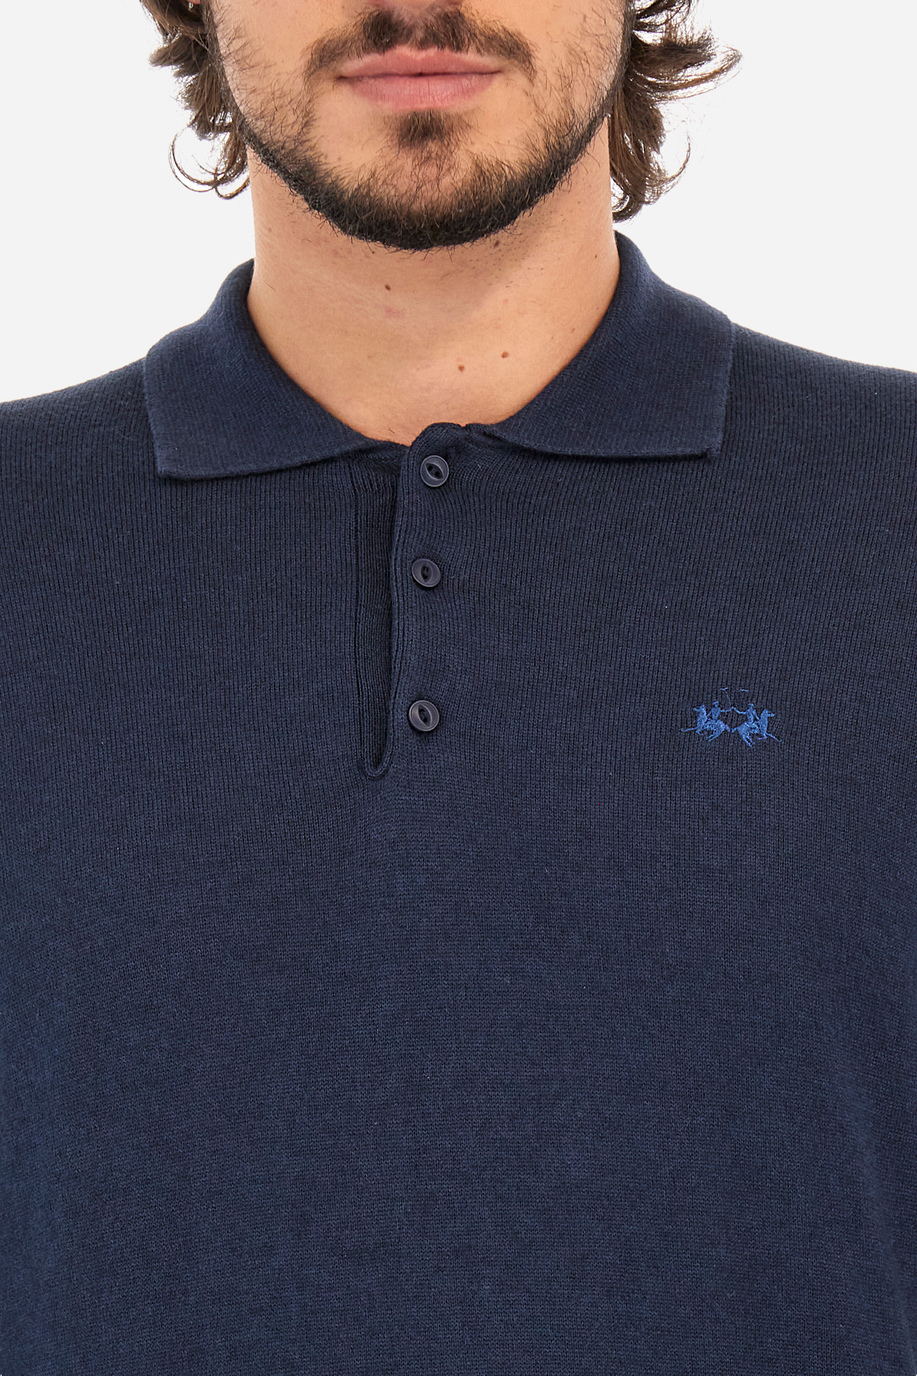 Men’s knitted polo shirt in cotton and wool - Waits - -50% | step 3 | all | La Martina - Official Online Shop